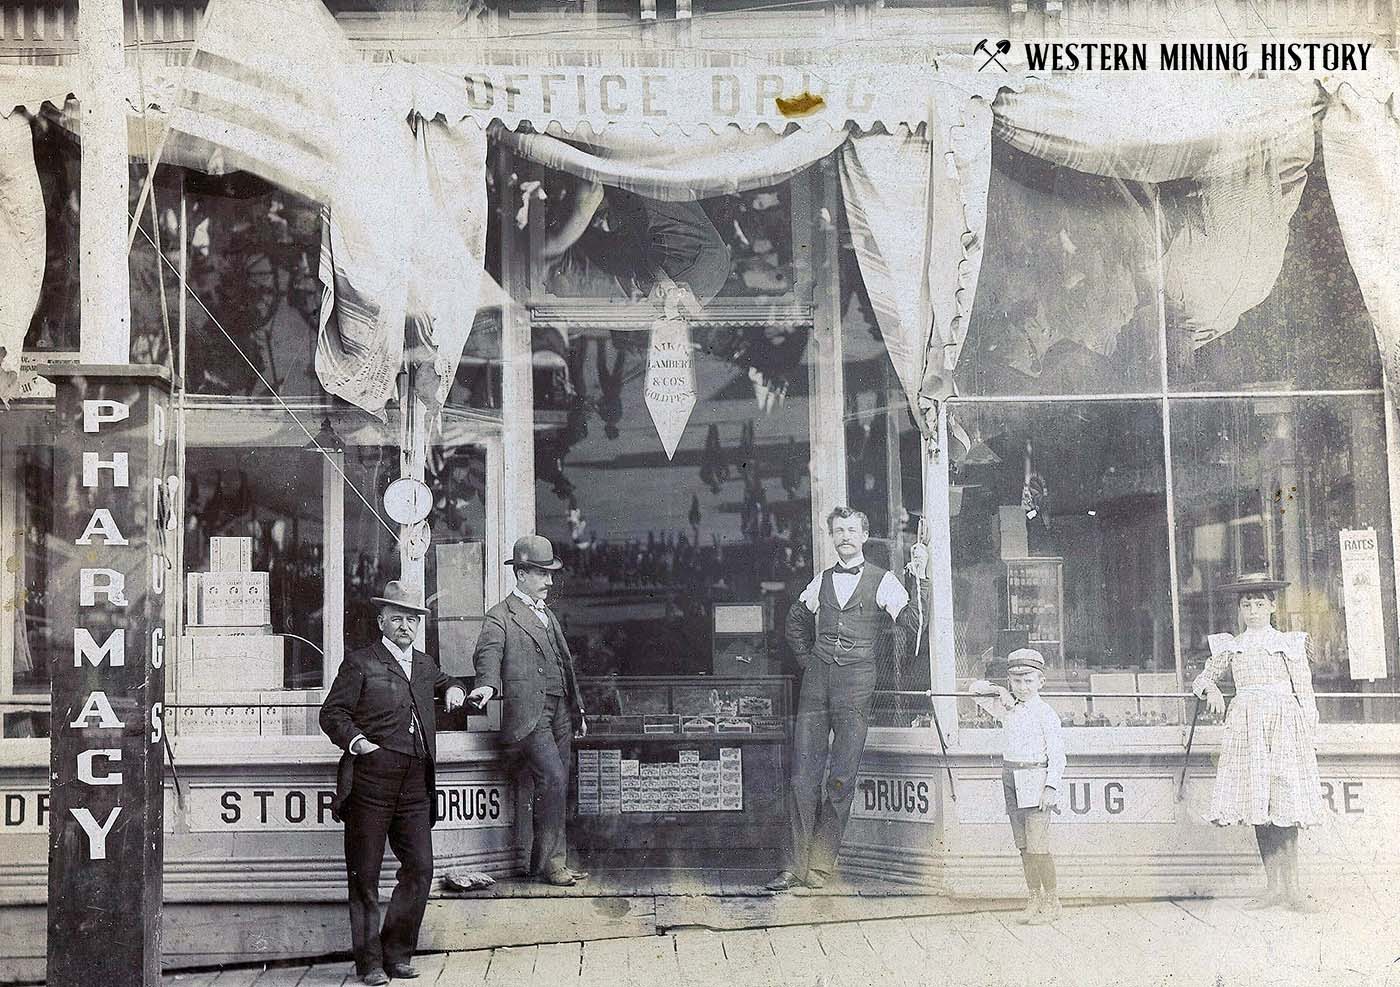 Pharmacy at Ouray, Colorado late 1800s